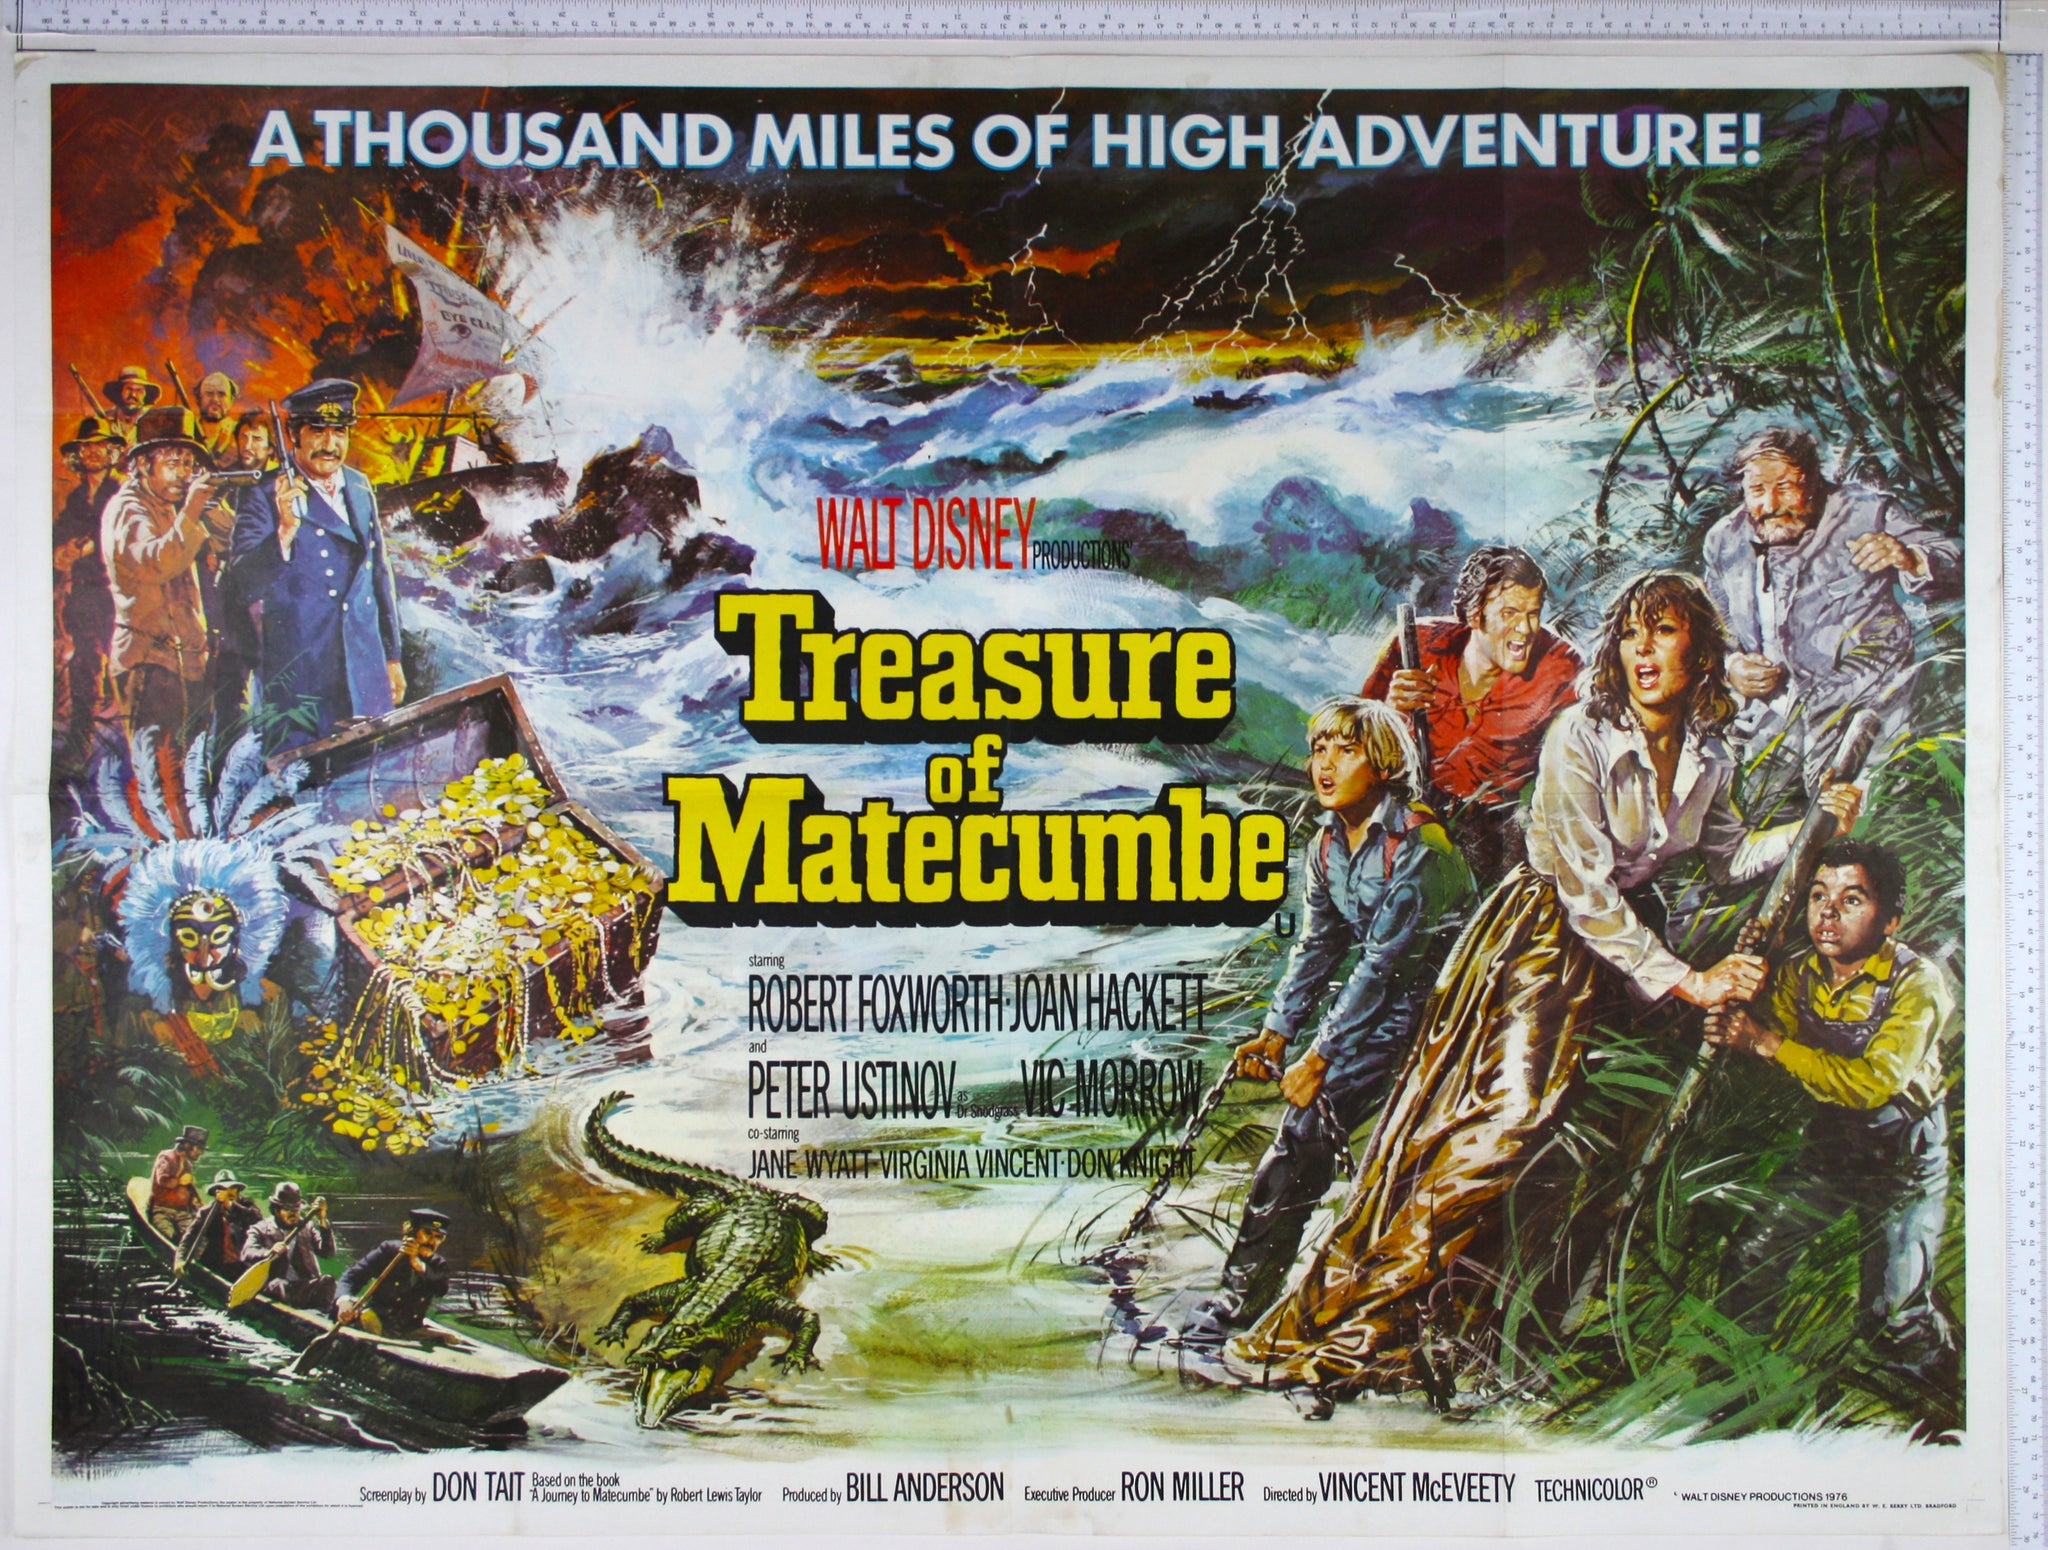 Action packed artwork of sea storm, treasure, pirates, canoes, alligators and the family struggling through jungle.